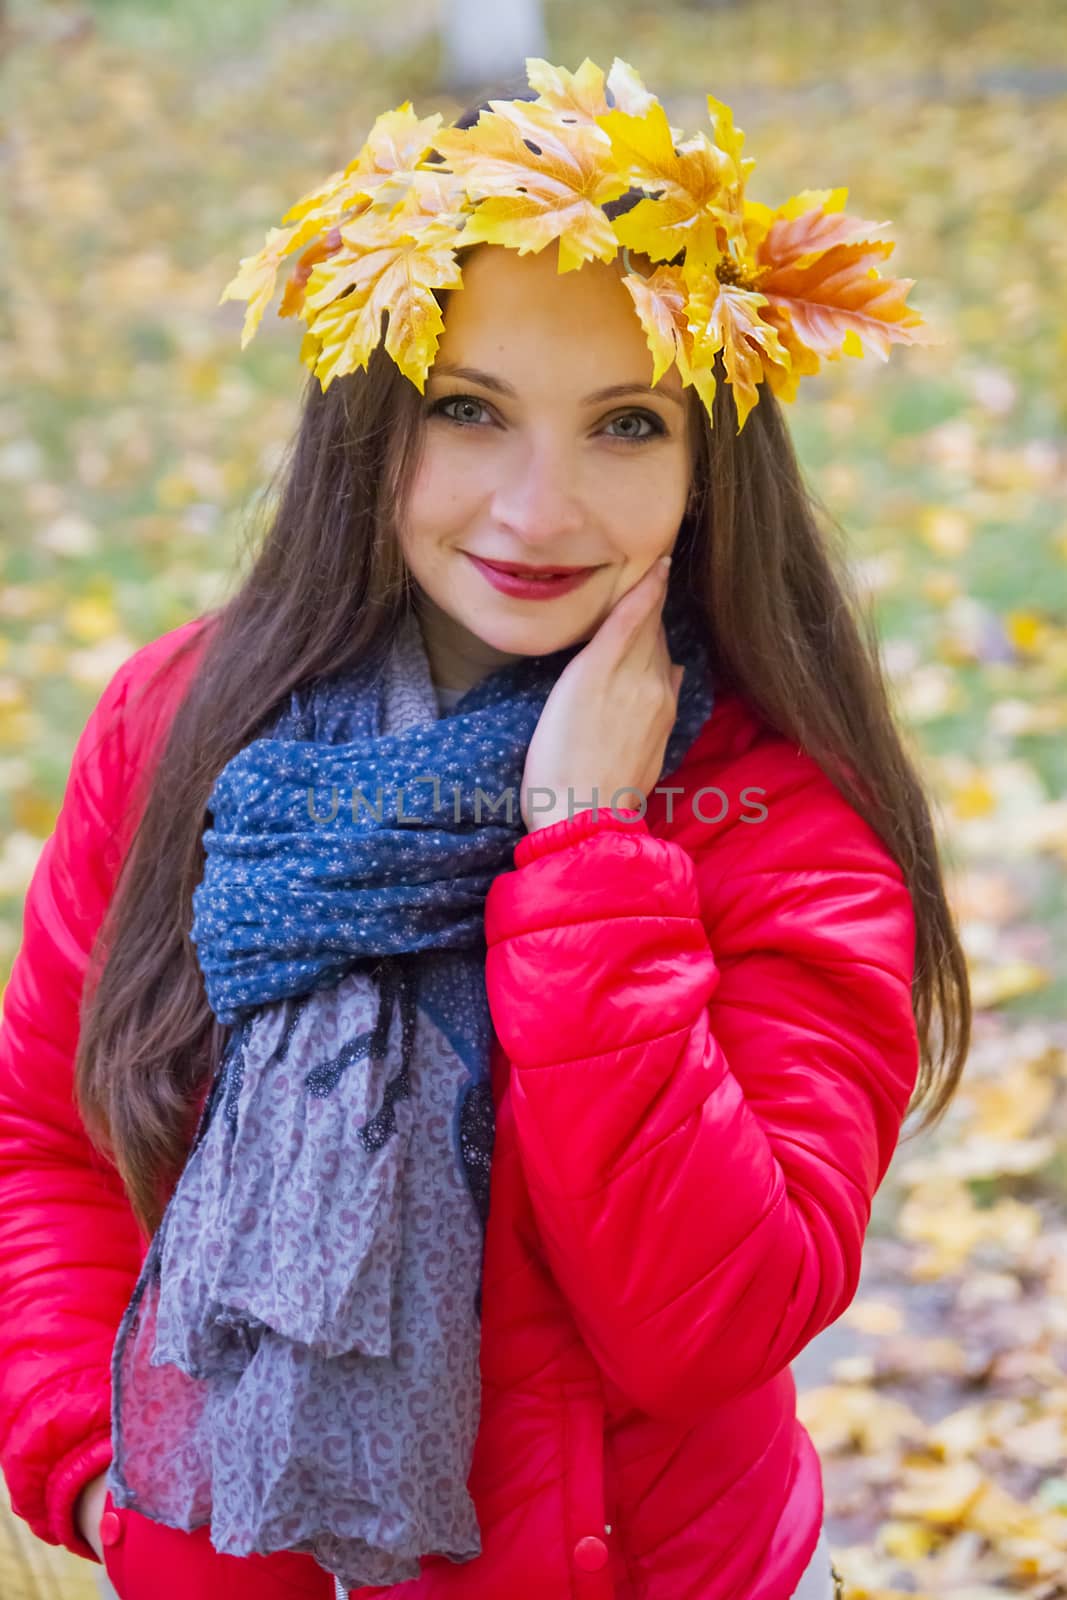 Autumn woman with yellow maple leaves by Angel_a